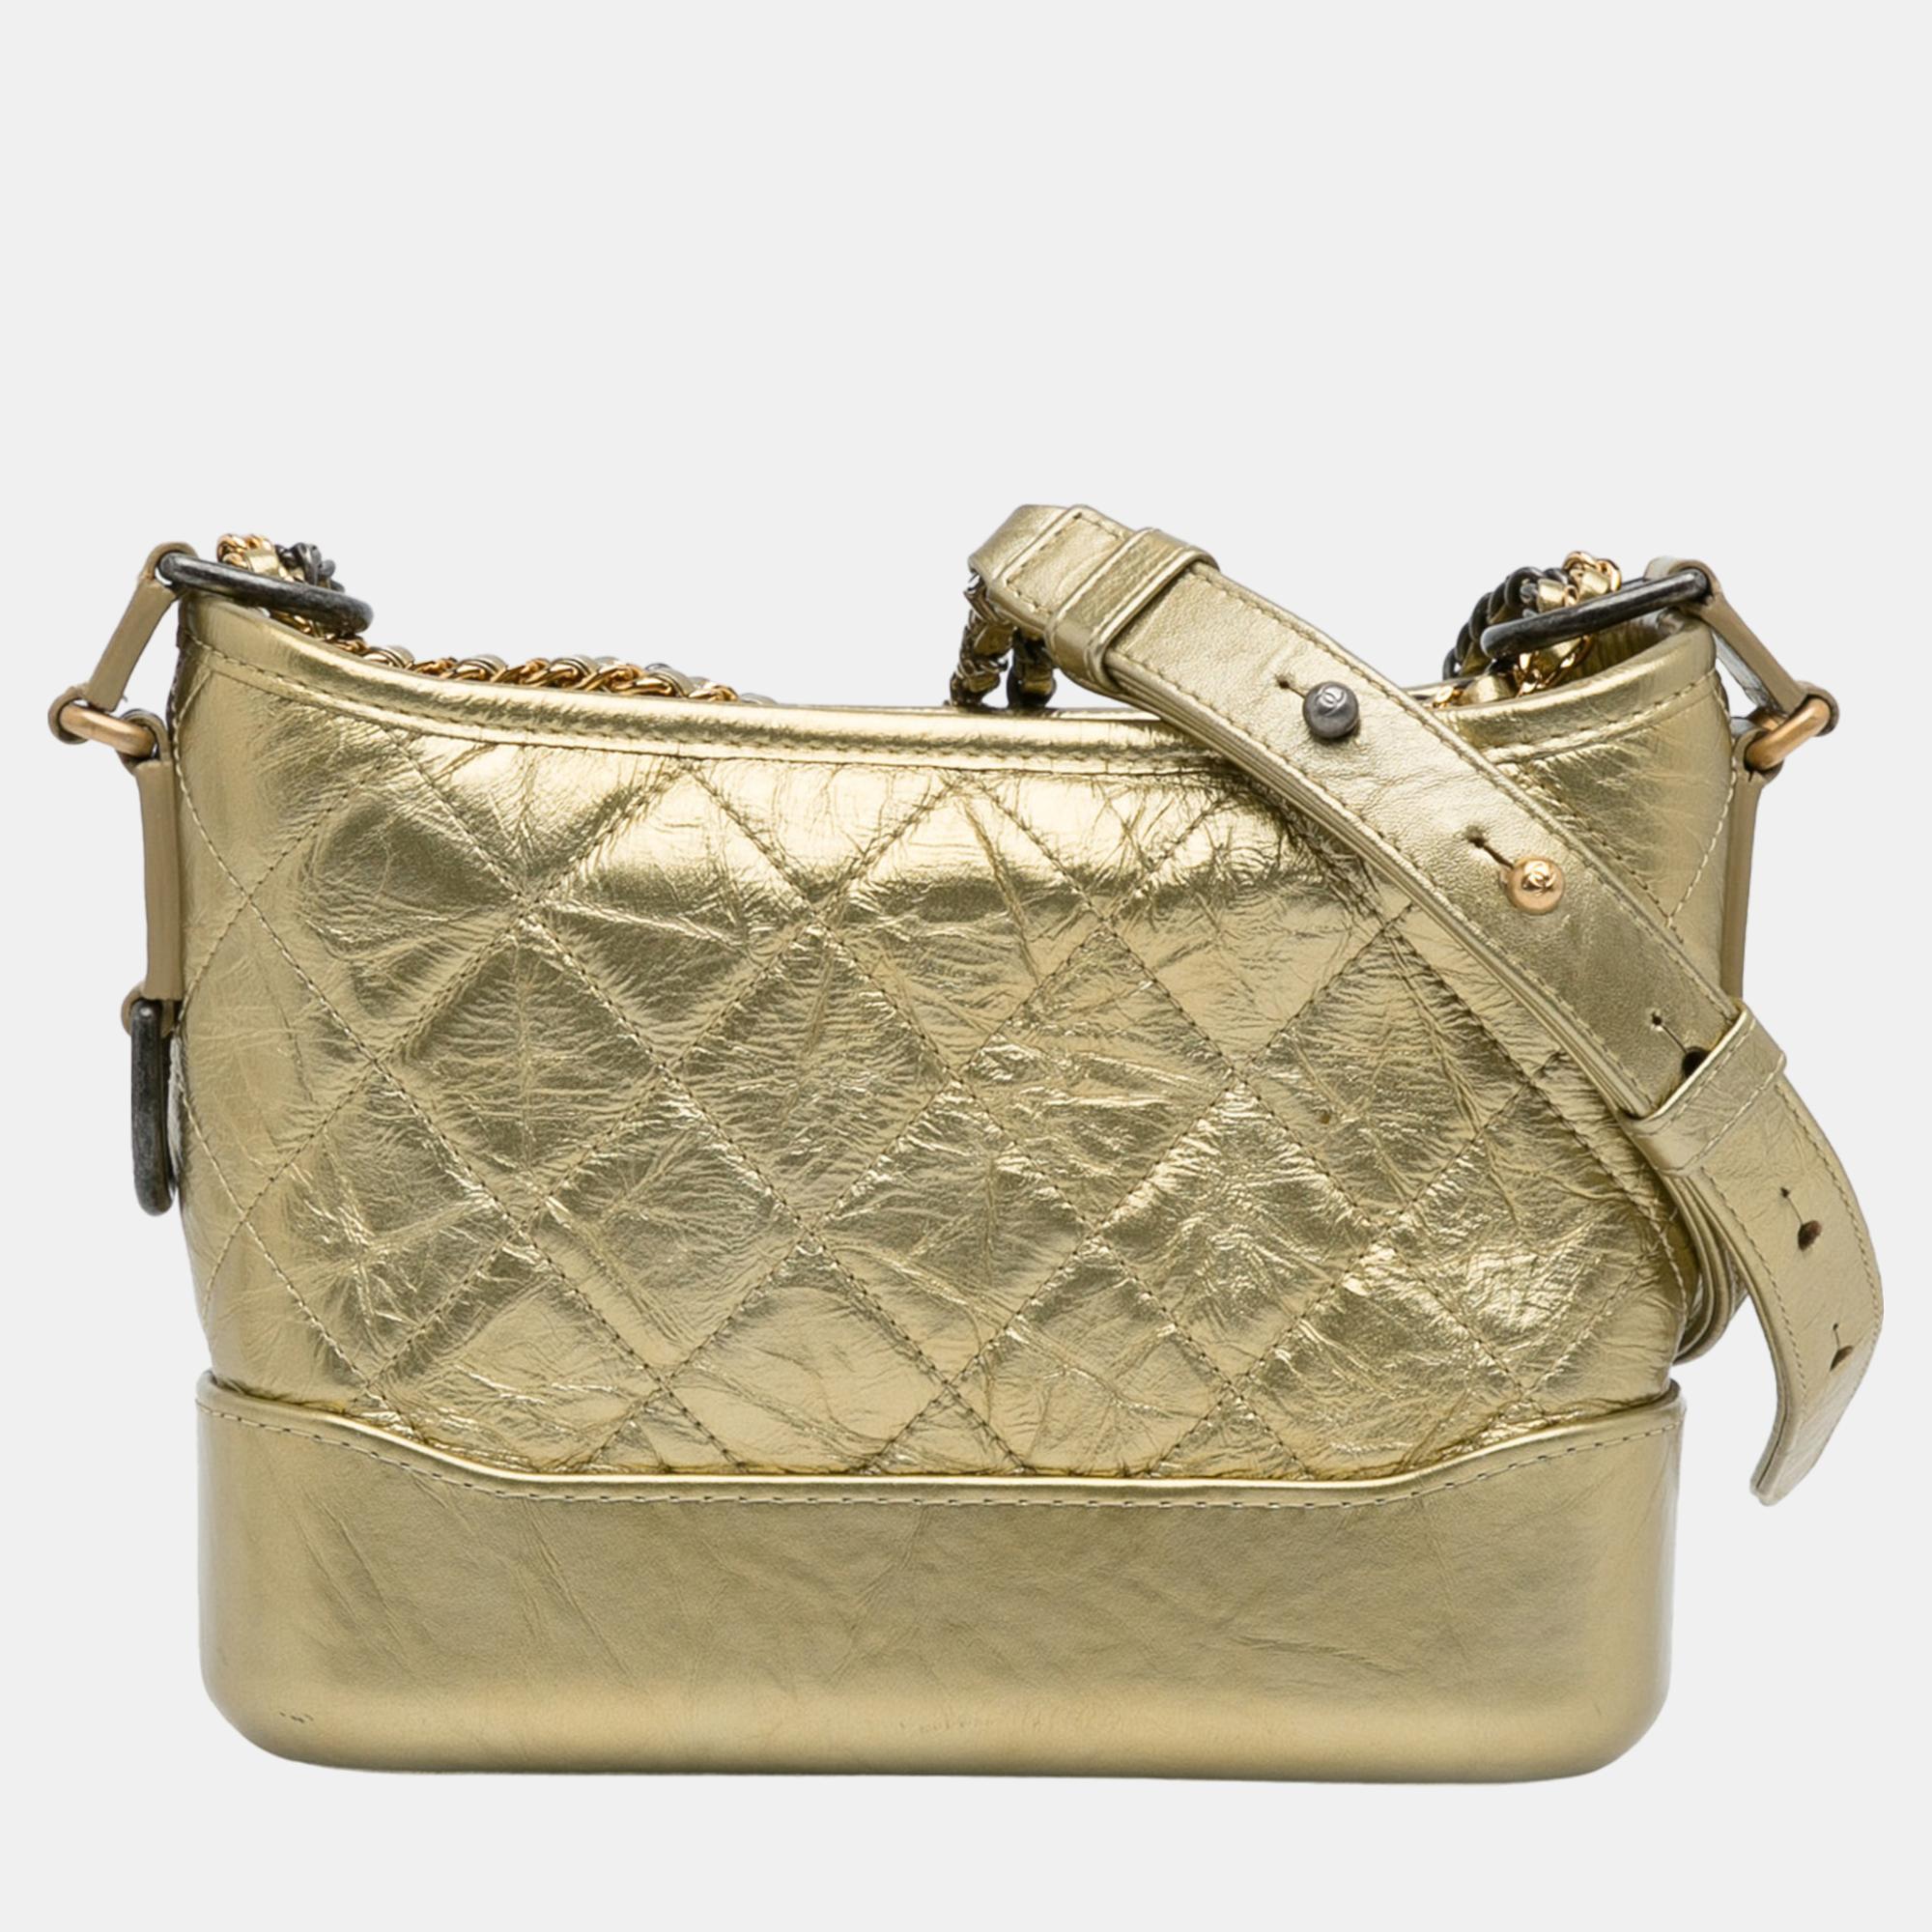 The Gabrielle features a quilted leather body detachable chain link leather shoulder straps a top zip closure and interior zip and slip pockets.